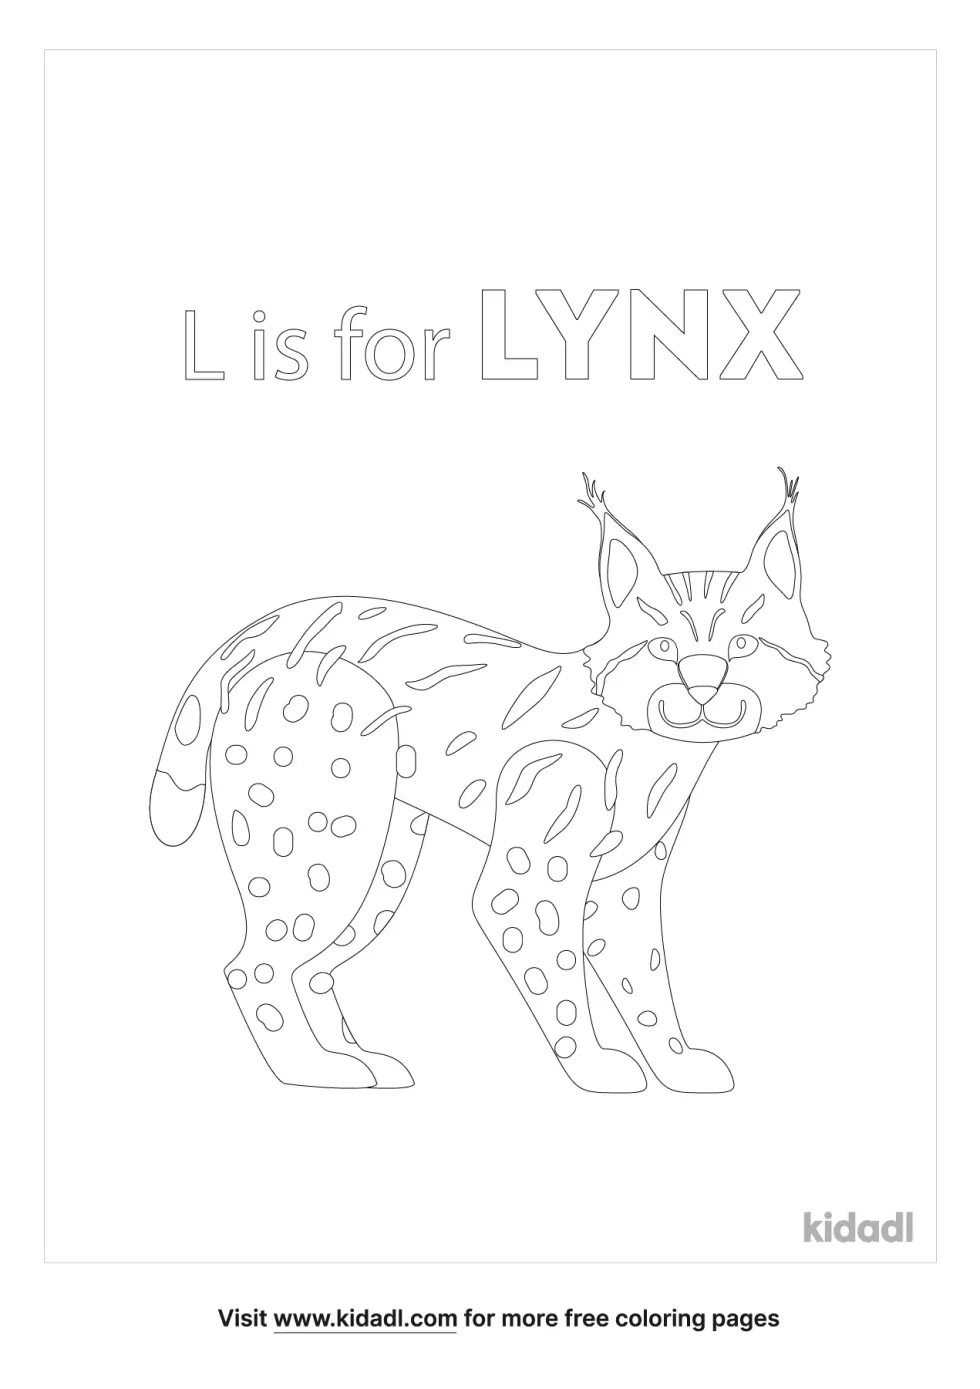 L Is For Lynx